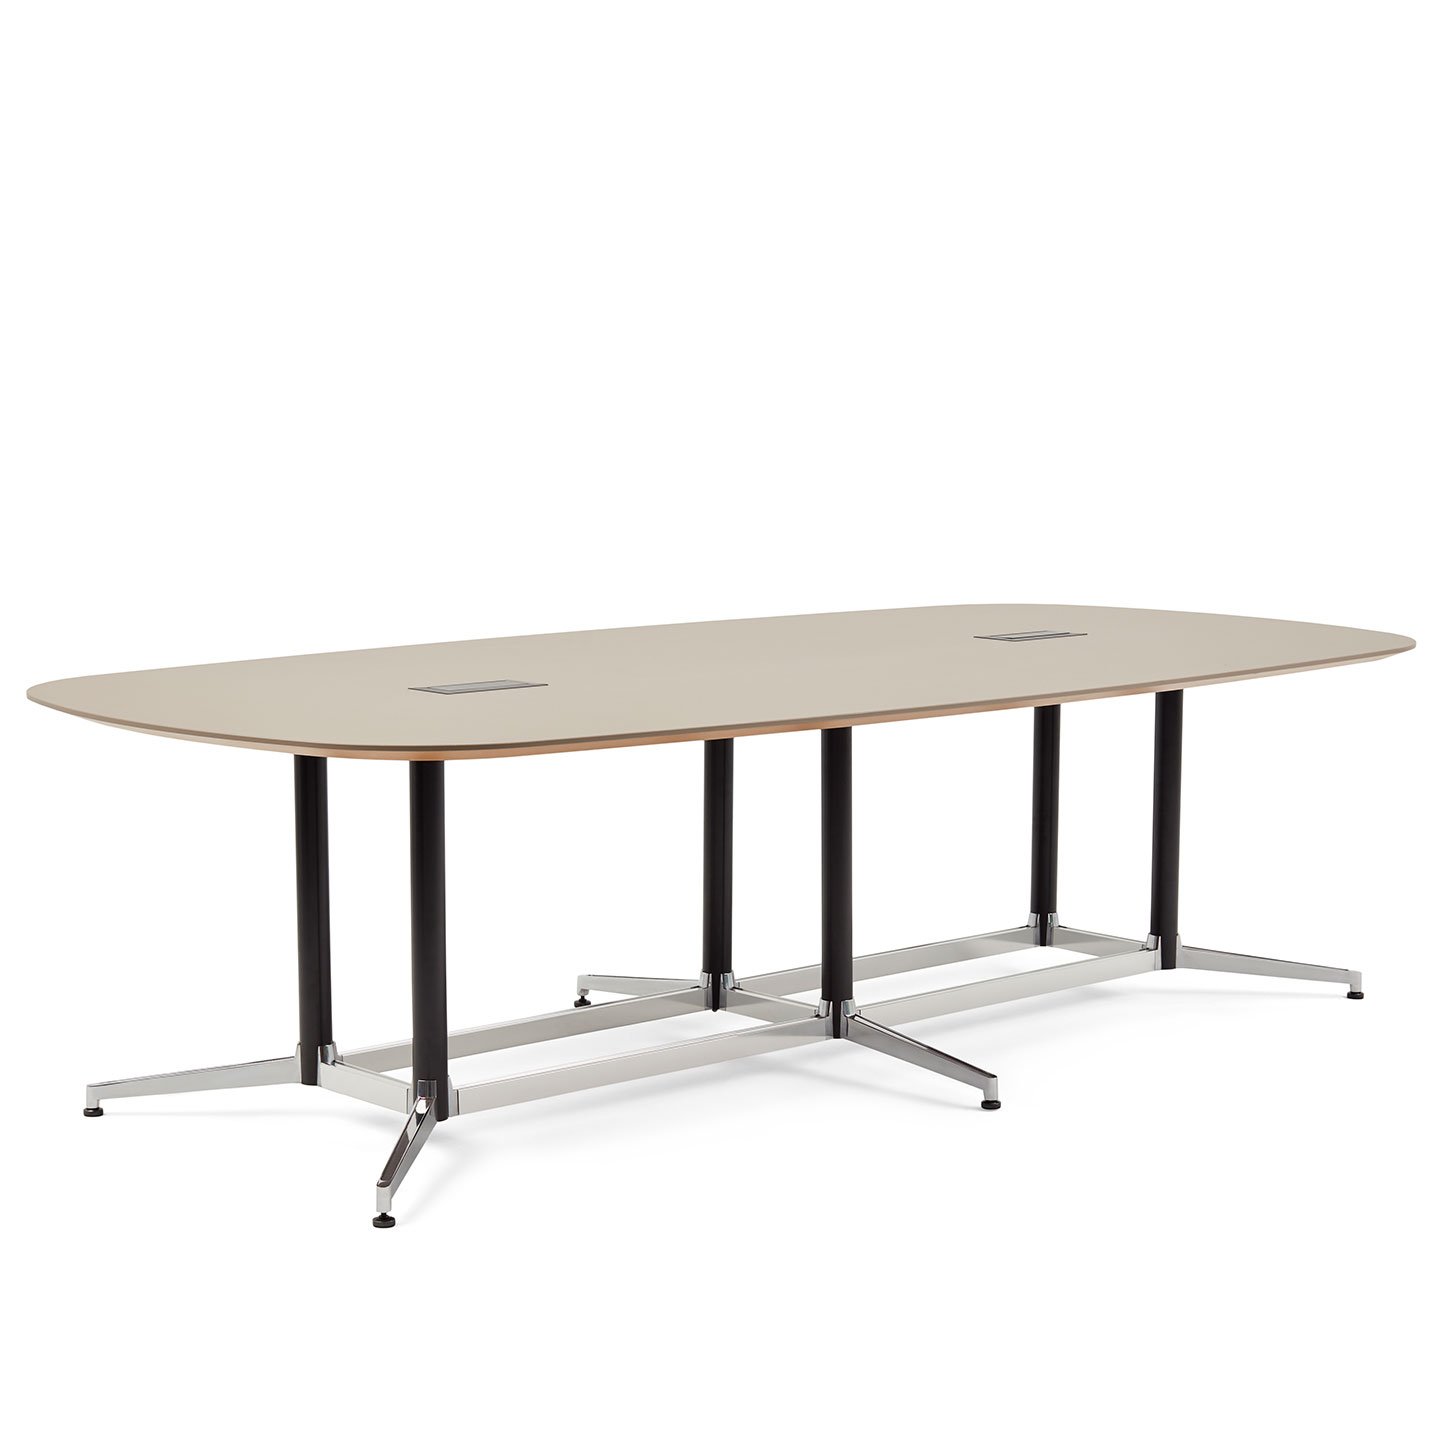 Haworth Jive Whitesweep table with long top and 6 legs with cord organizers 